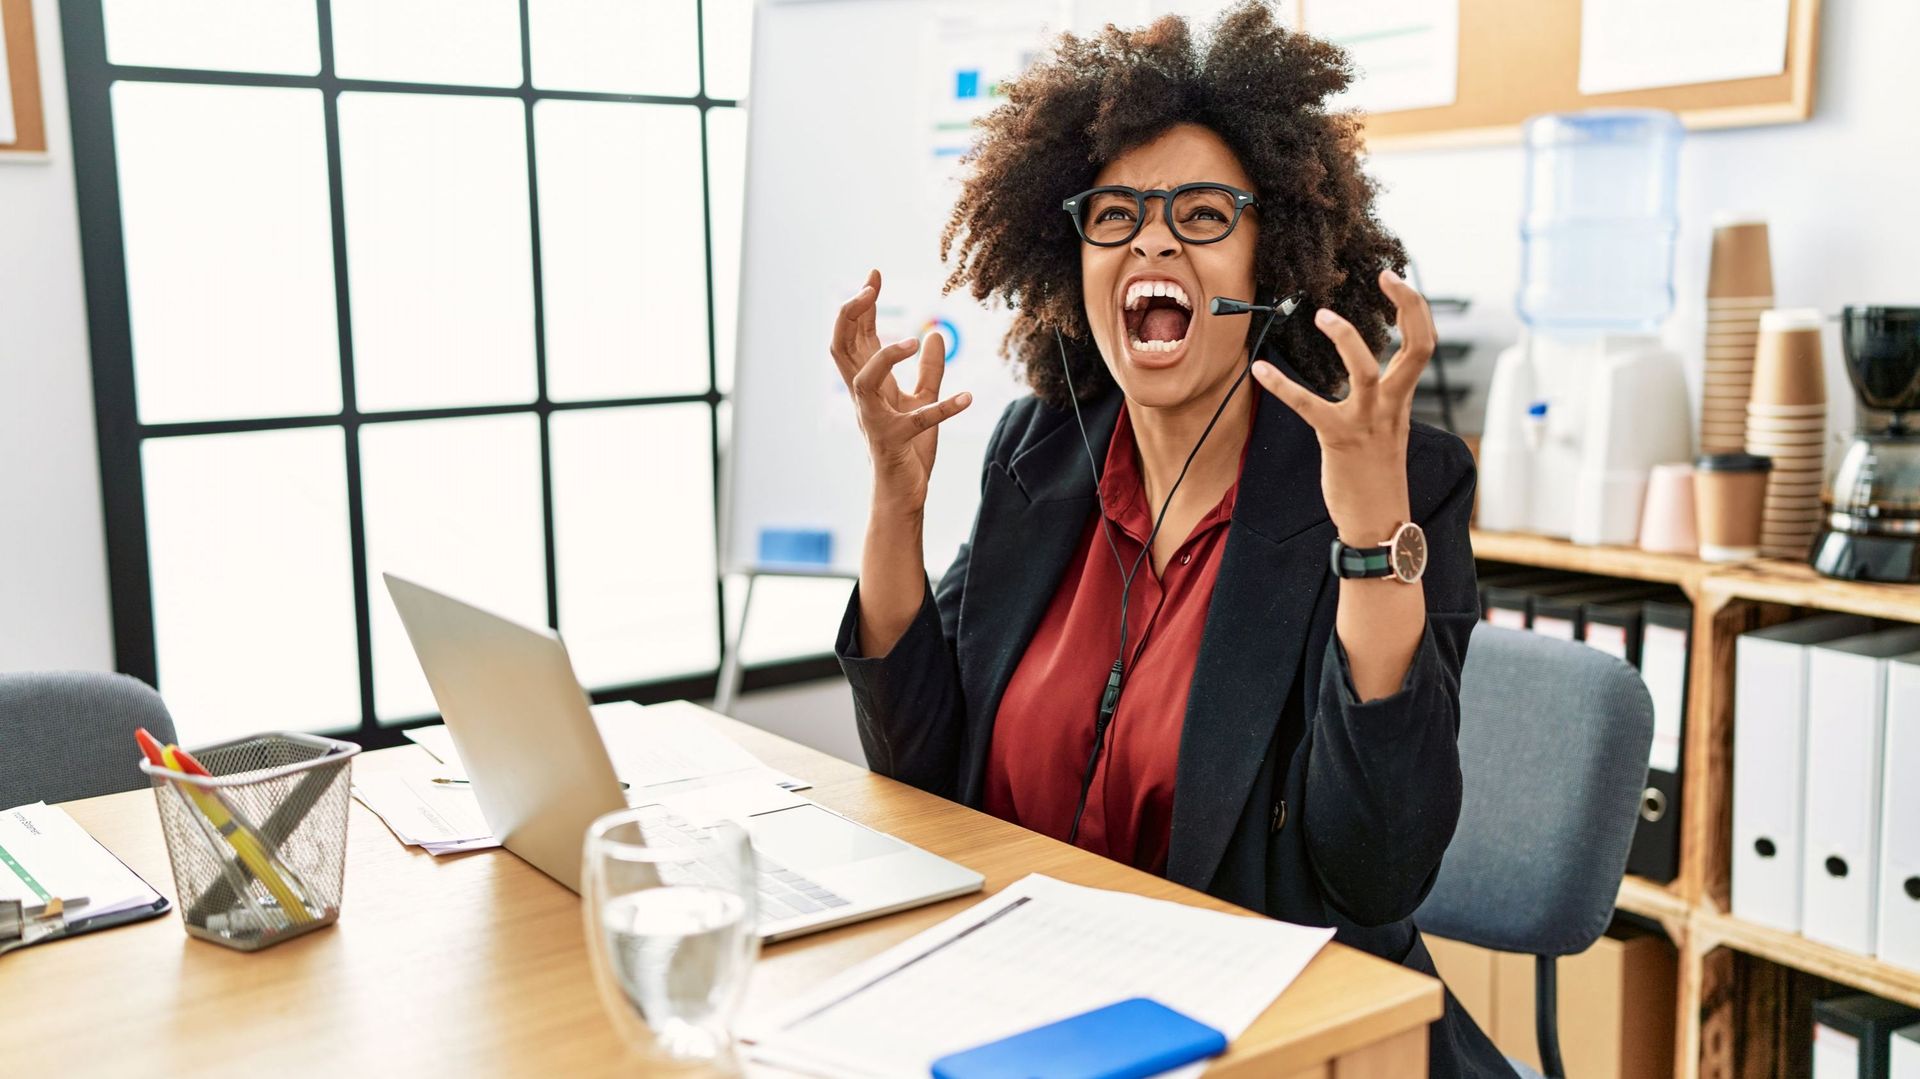 African american woman with afro hair working at the office wearing operator headset crazy and mad shouting and yelling with aggressive expression and arms raised. frustration concept.